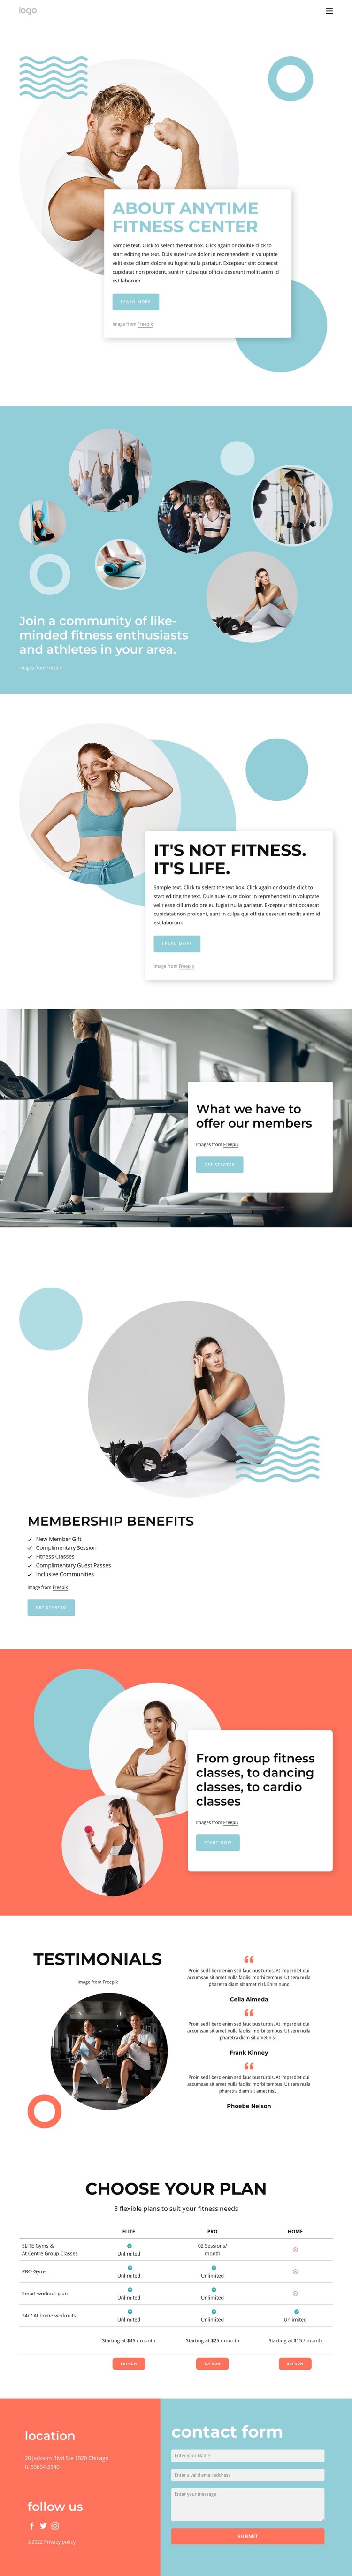 About Anytime fitness center Web Design